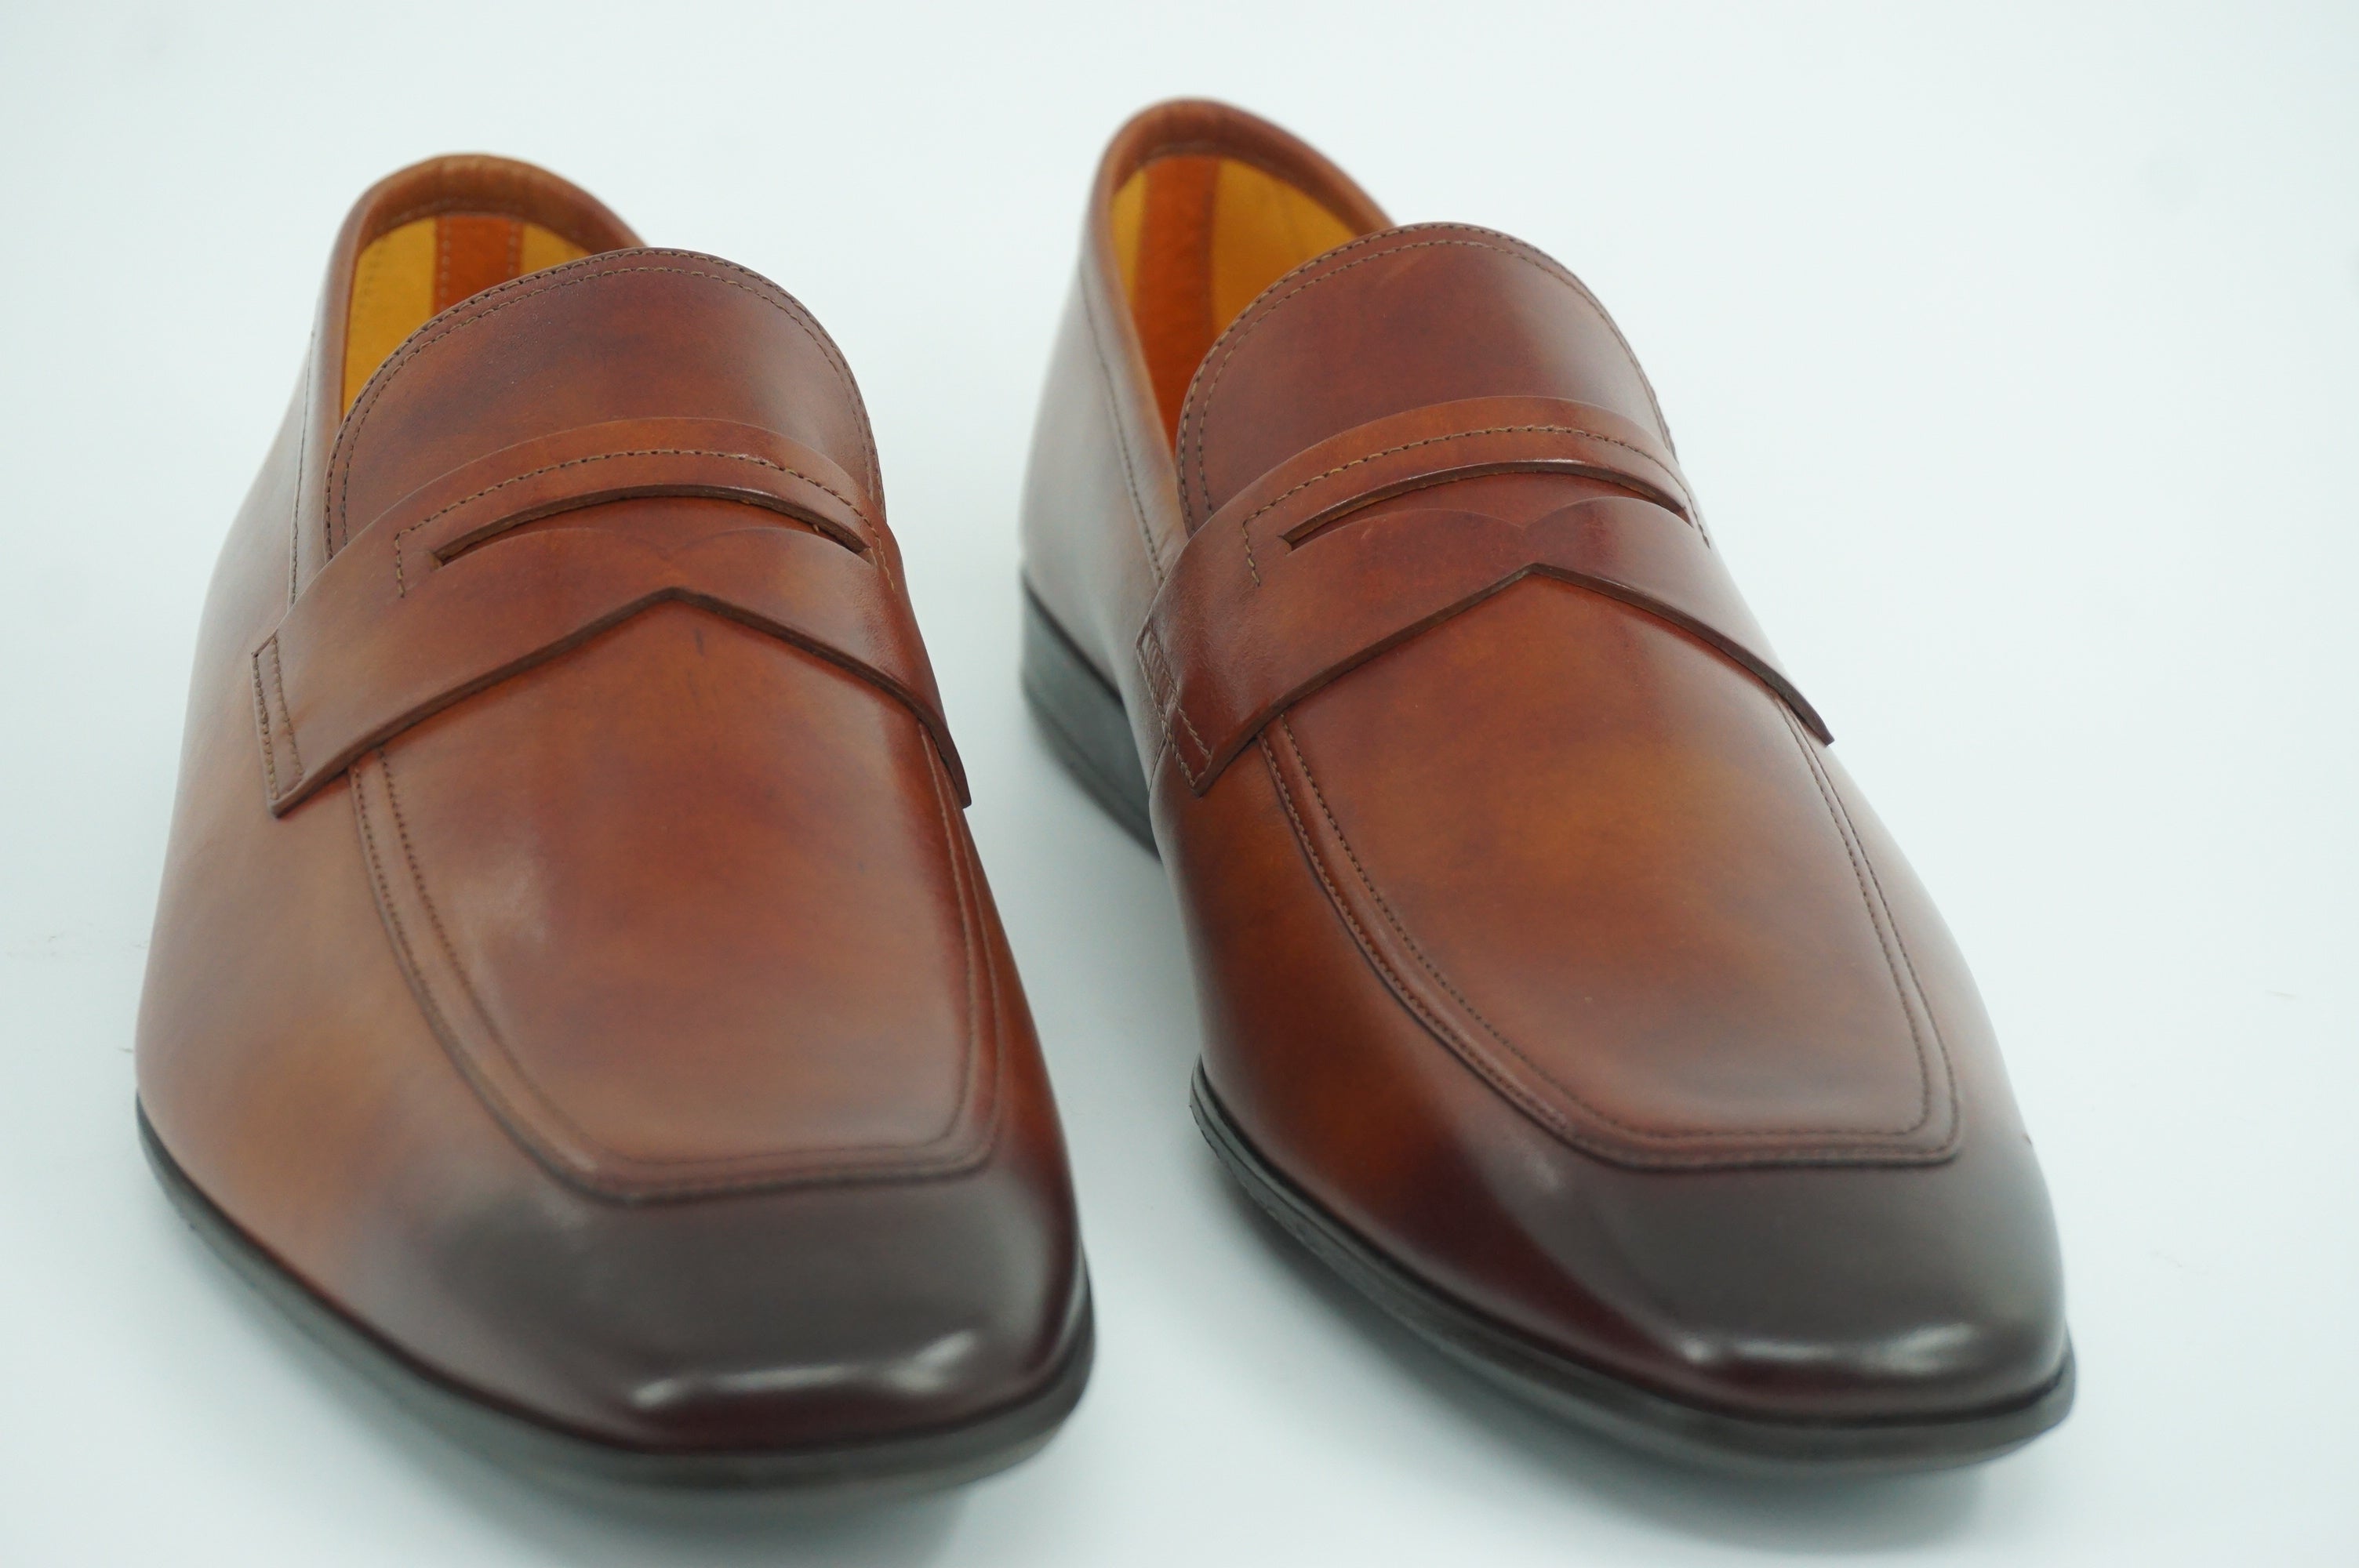 Magnanni Vale Penny Loafers Men's Dress Shoes SZ 9.5 Brown Leather $350 NIB